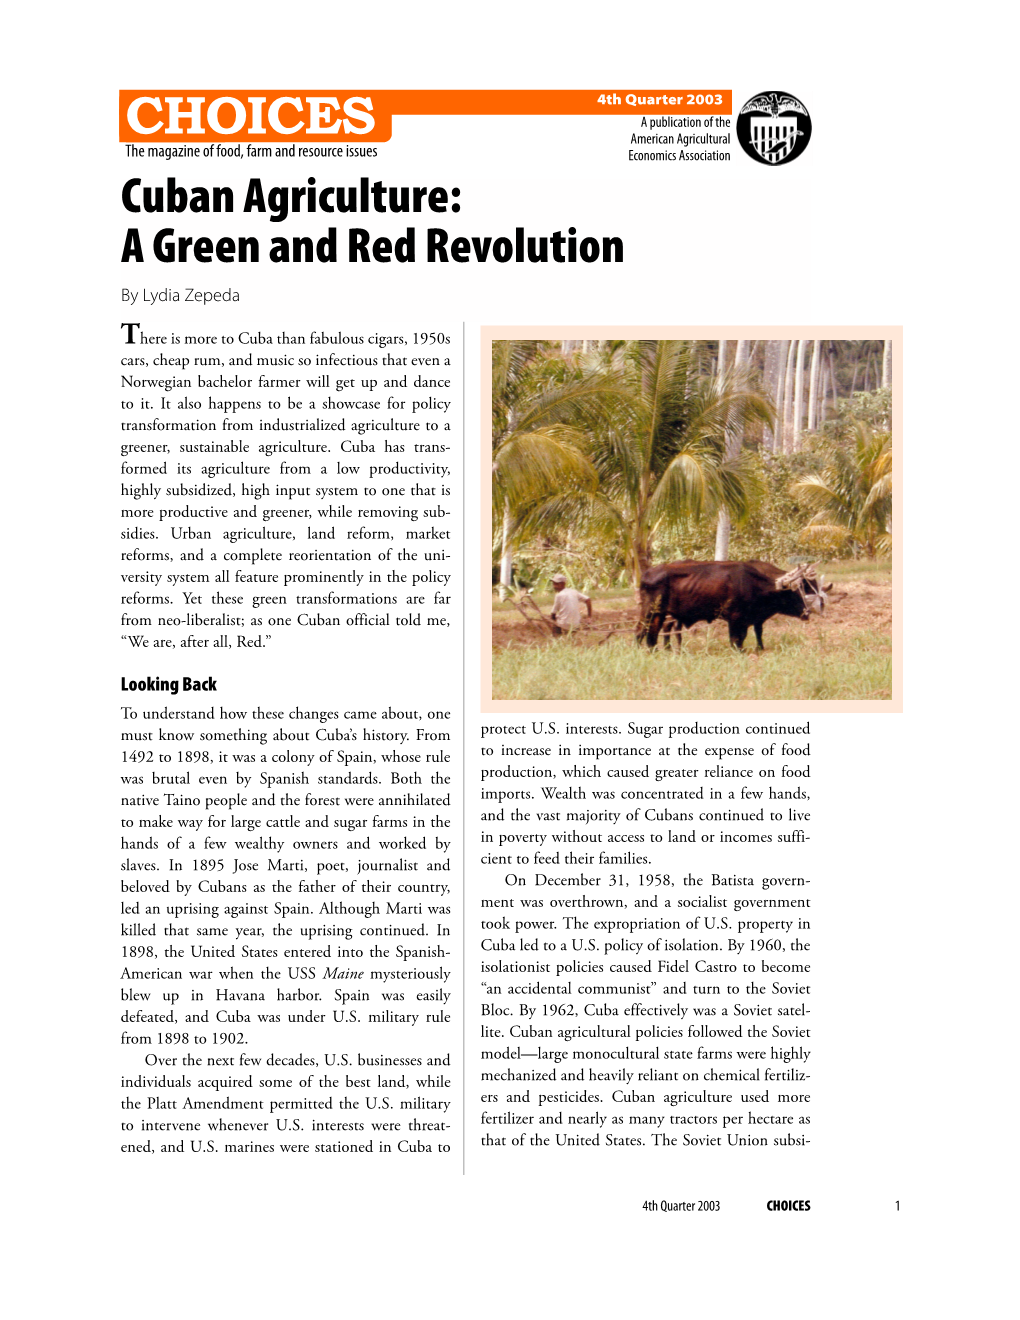 Cuban Agriculture: a Green and Red Revolution by Lydia Zepeda